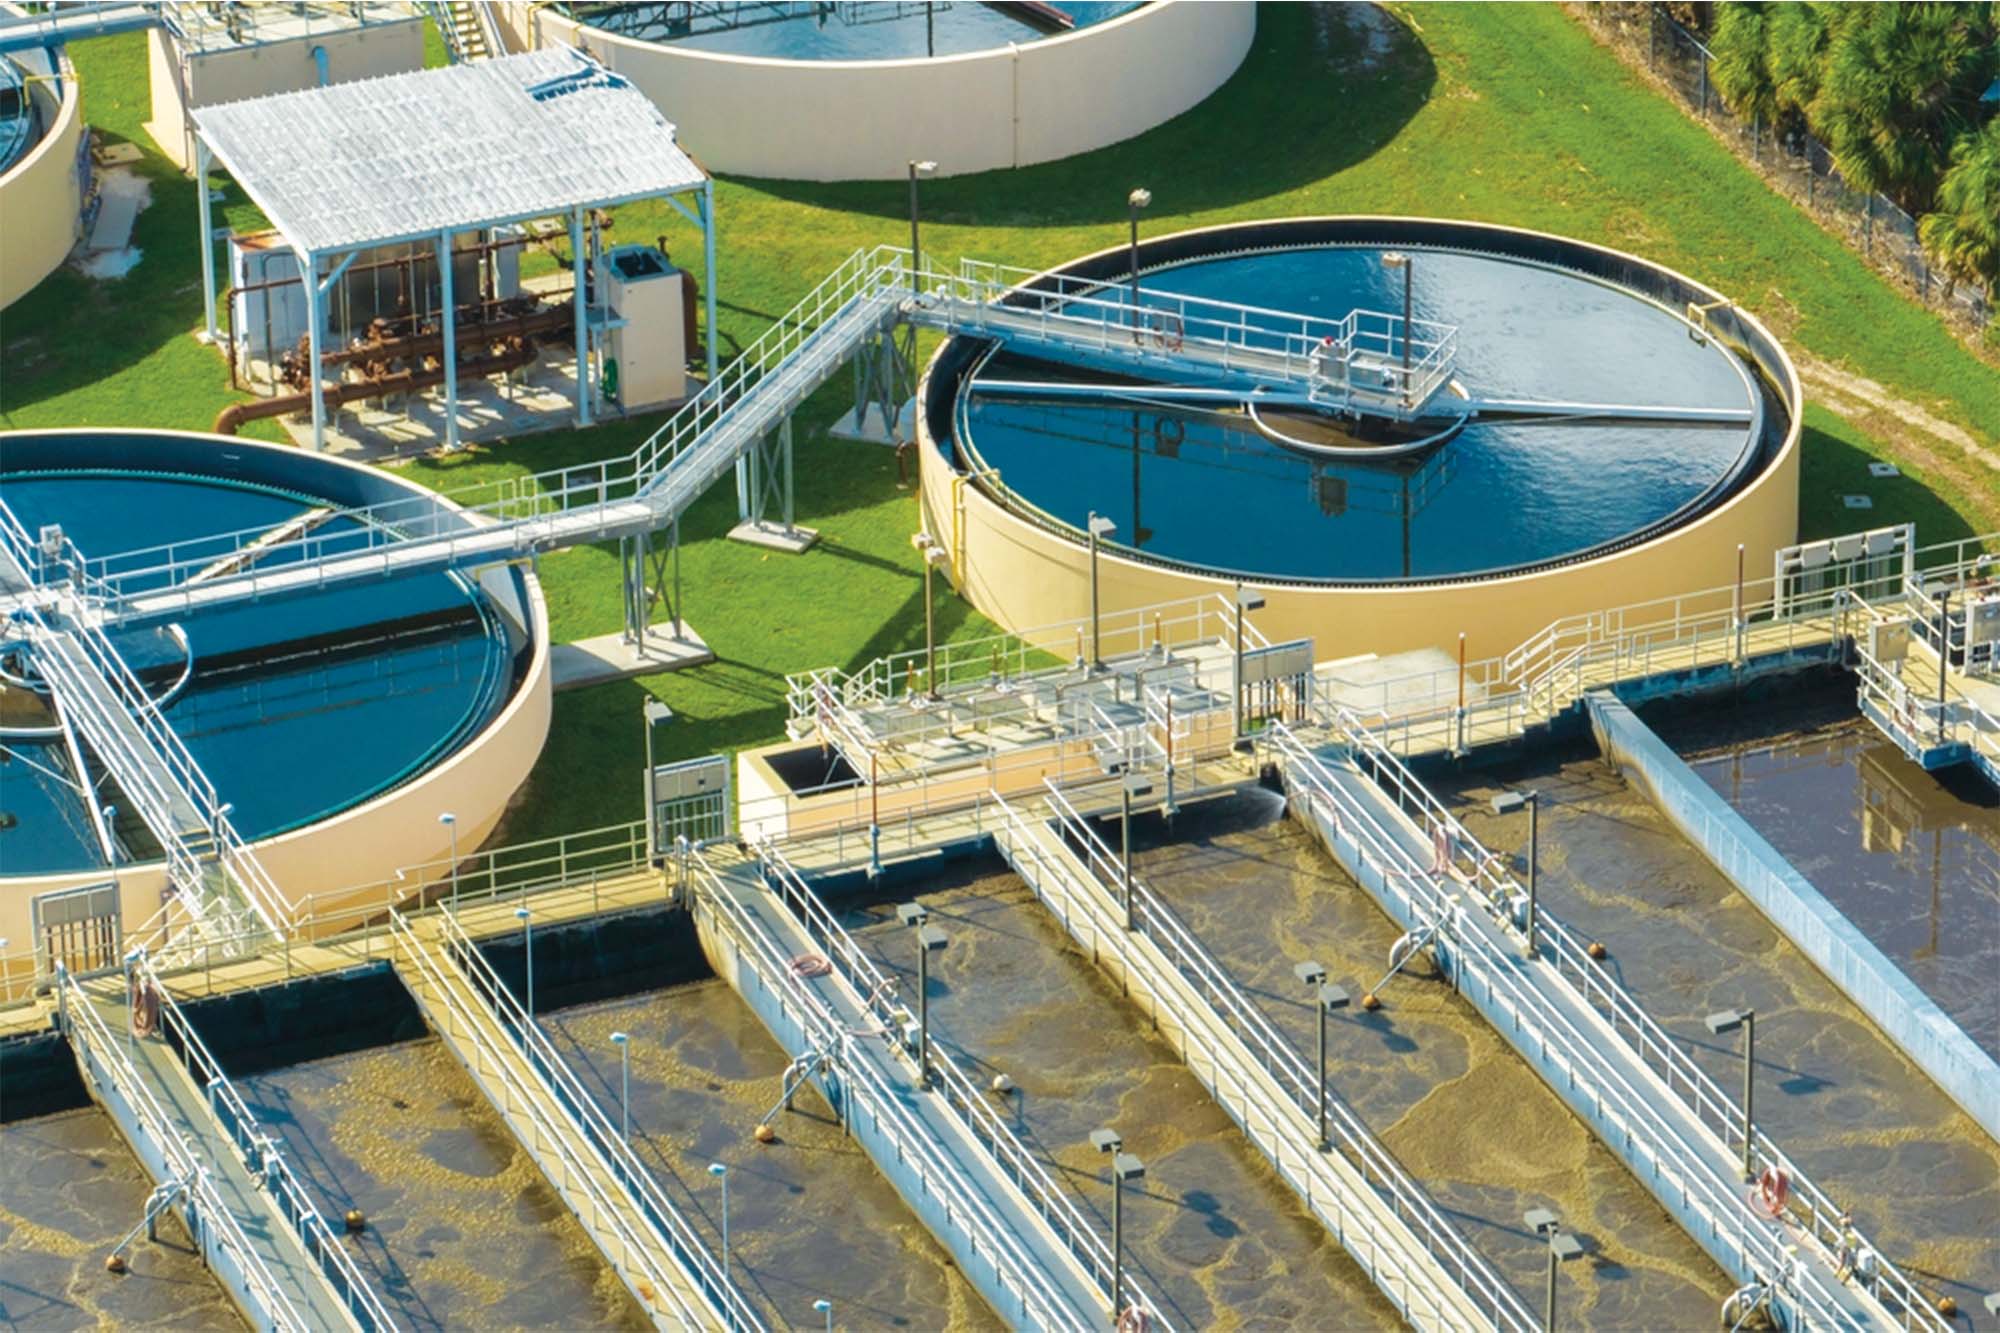 The progress of wastewater to wealth